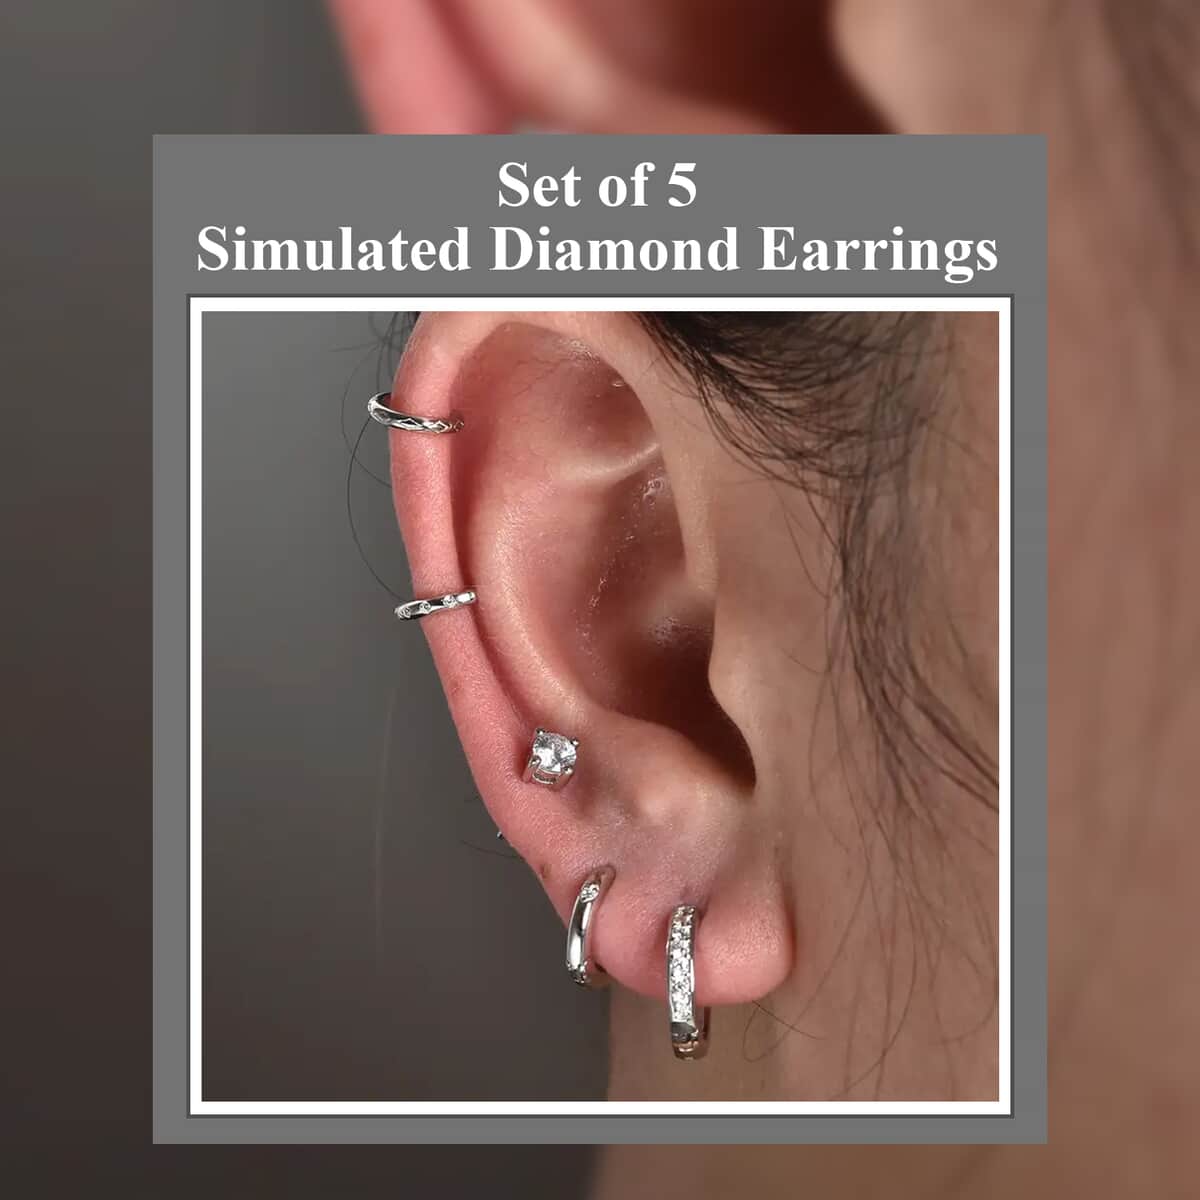 Set of 5 Simulated Diamond 1.40 ctw Earrings in Rhodium Over Sterling Silver, Simulated Diamond Solitaire Studs, Tribal Pattern Earrings, Plain Ear Cuffs, Simulated Diamond Studs image number 1